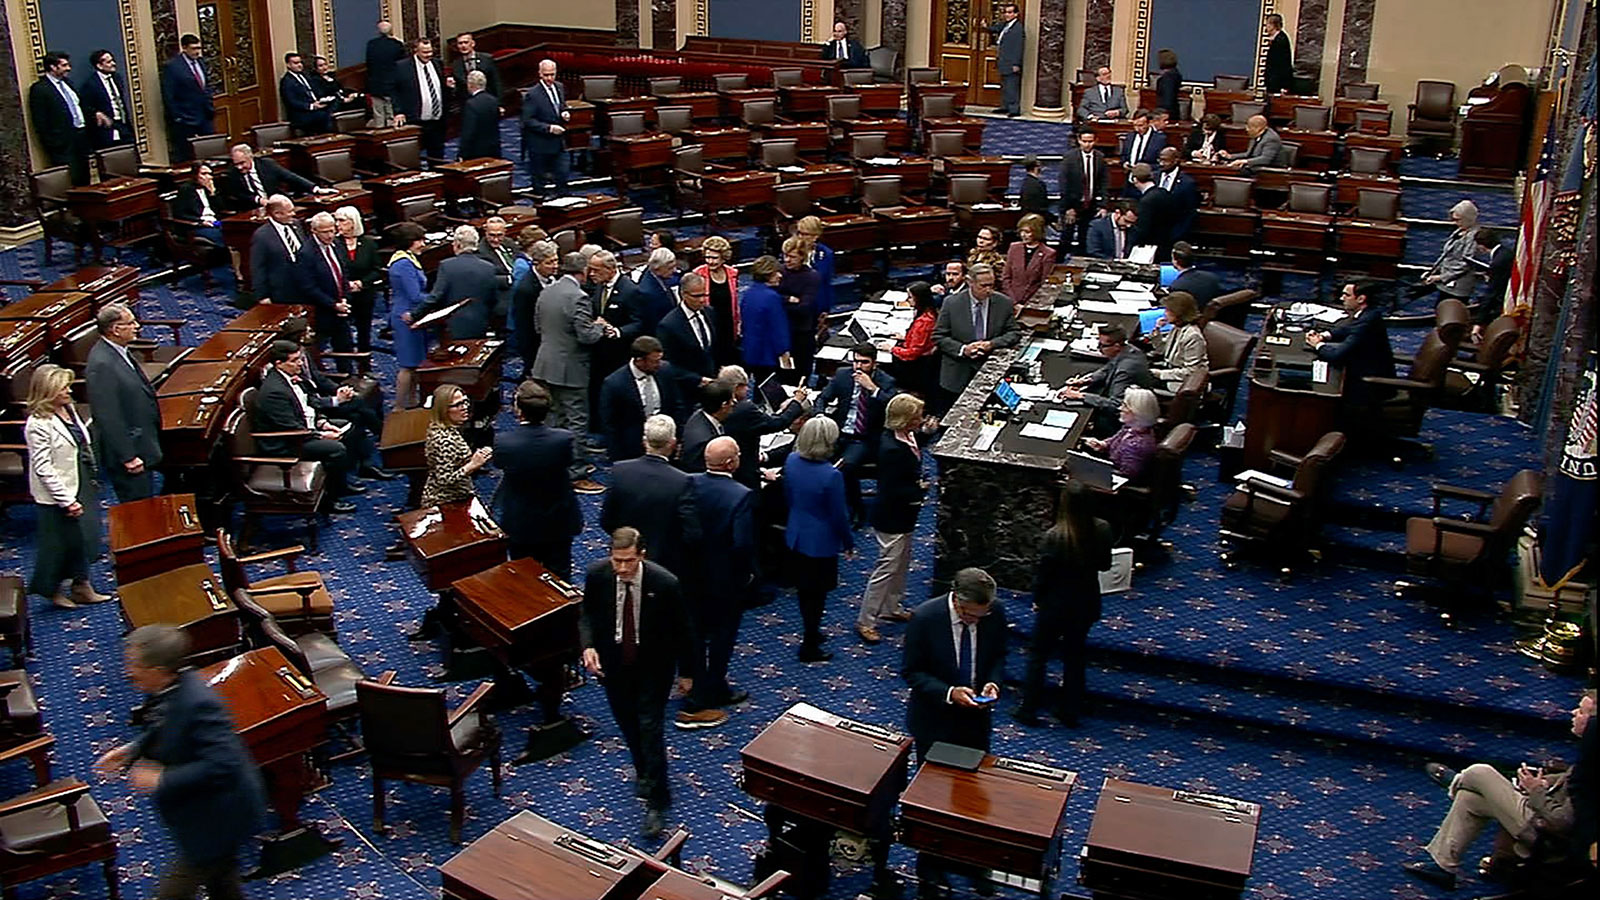 The Senate votes on final passage of the supplemental spending bill for Ukraine, Israel, Taiwan and humanitarian efforts.